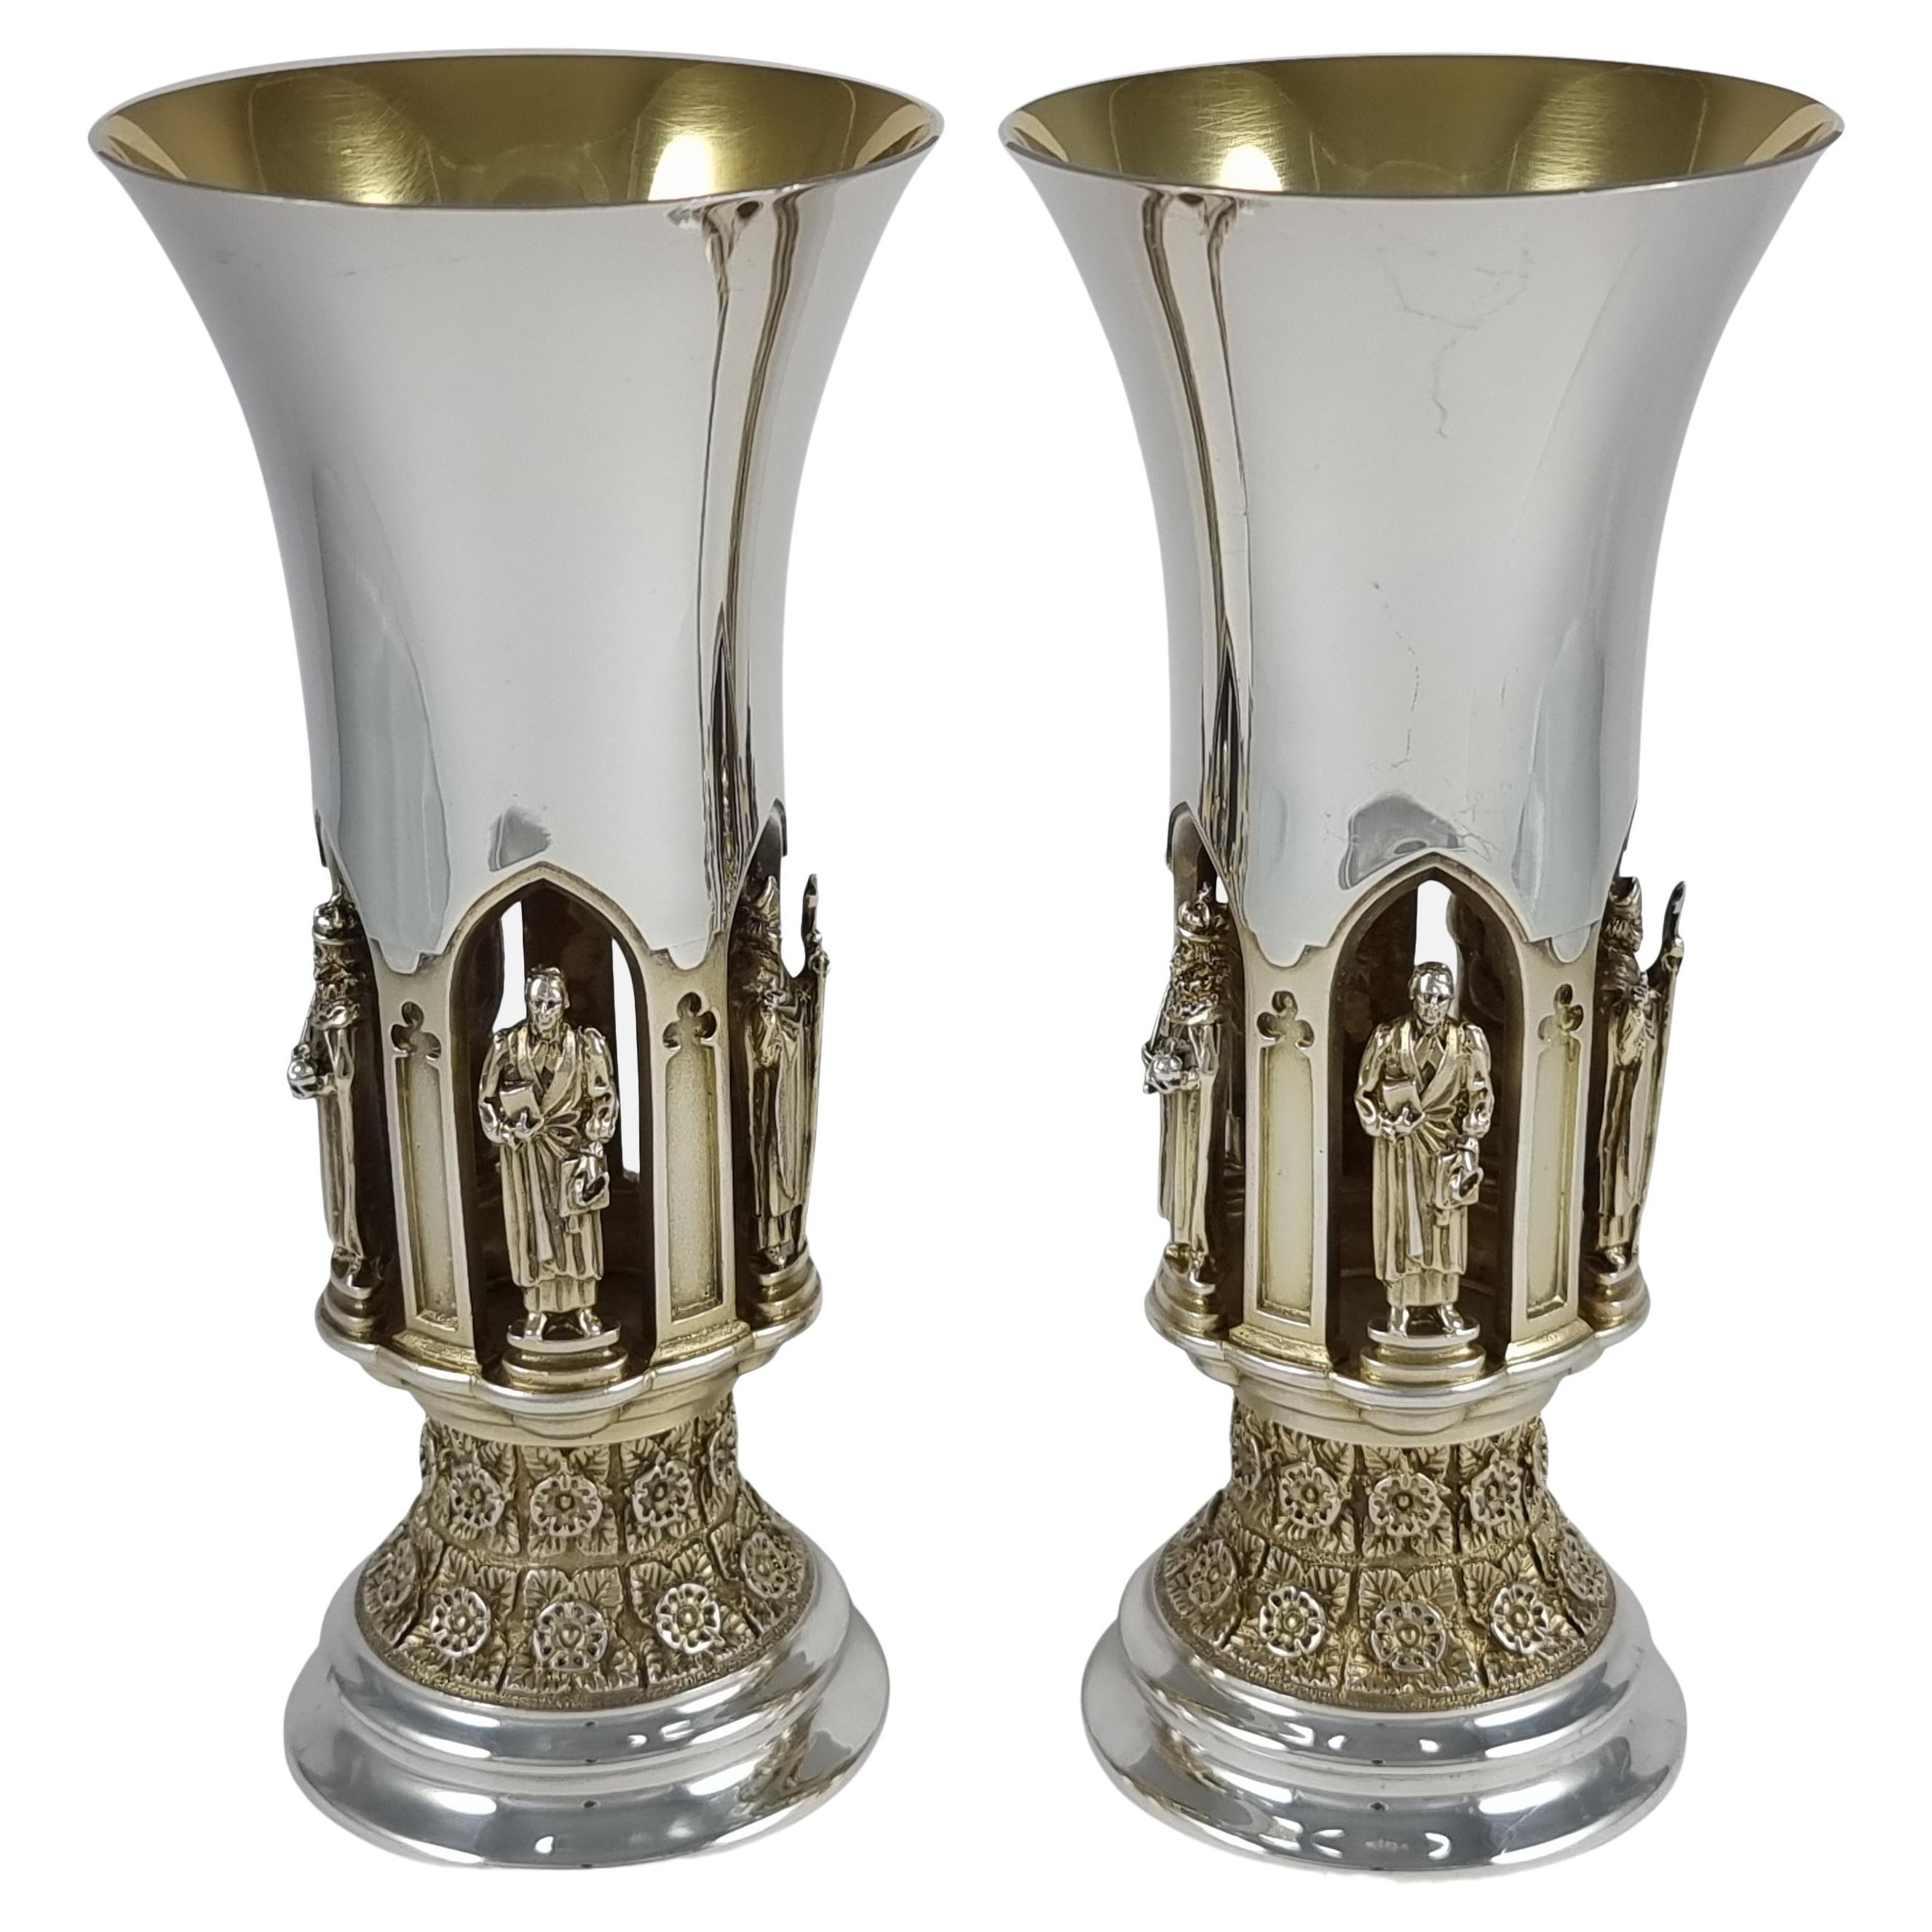 Pair of Aurum Silver Gilt 'Ripon Diocese Foundation' Goblets by Hector Miller